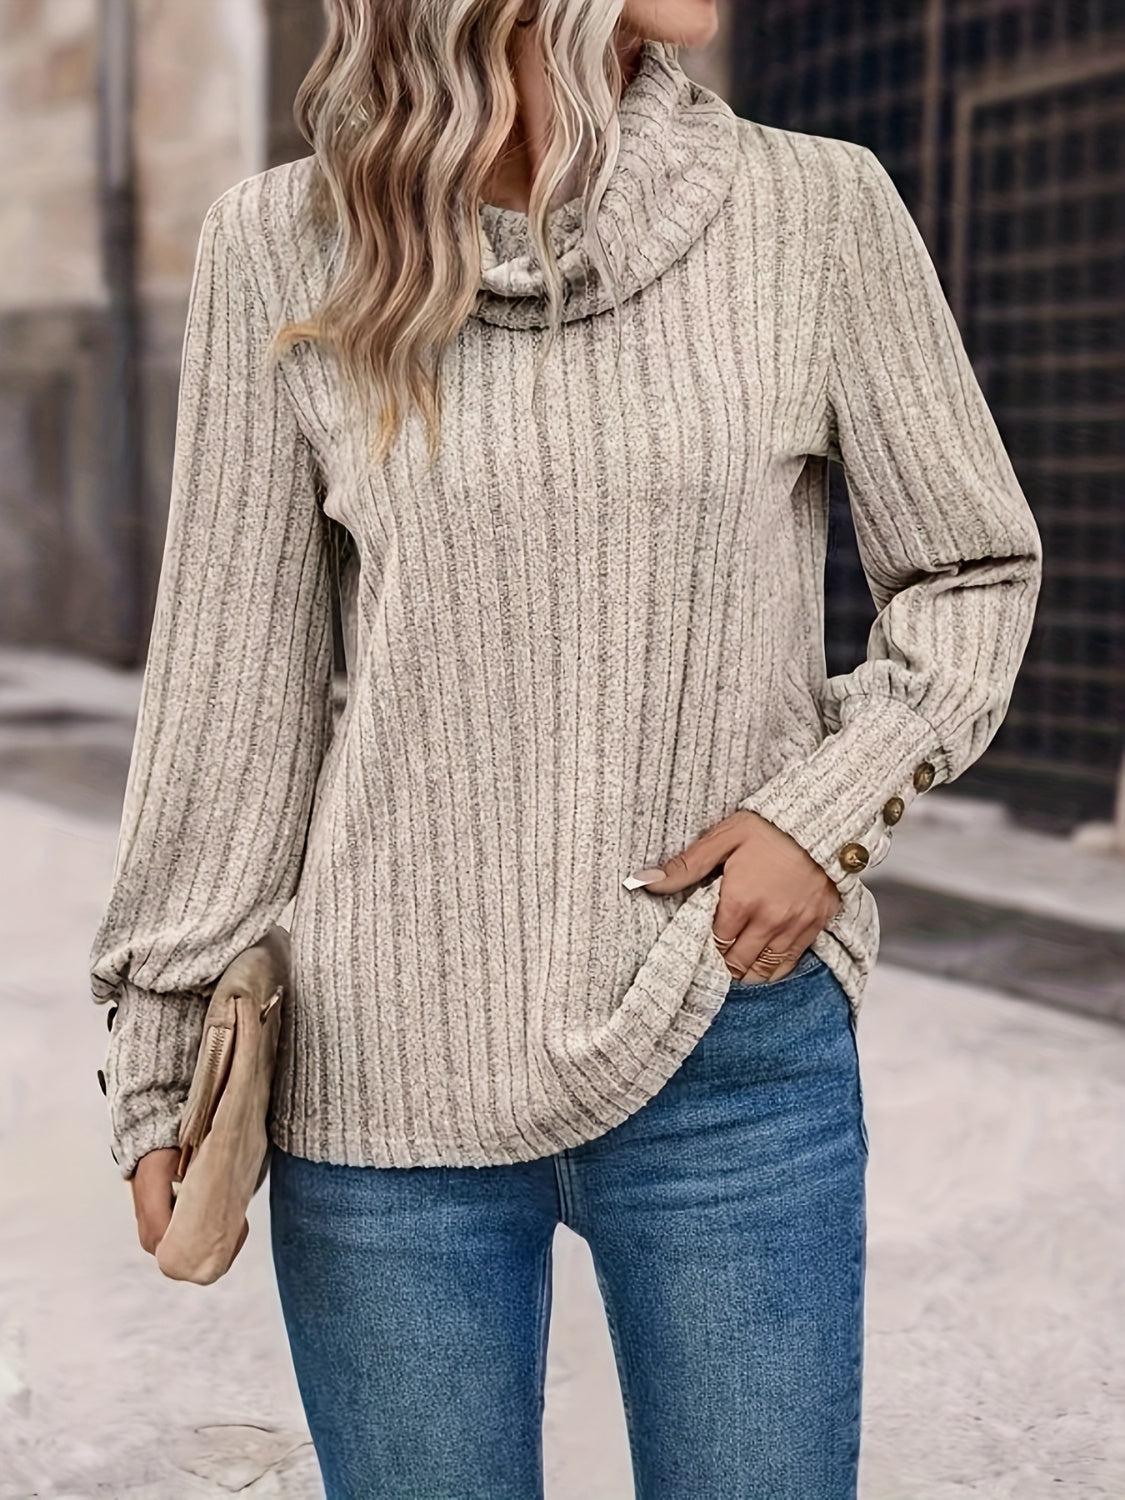 a woman standing on a sidewalk wearing a sweater and jeans